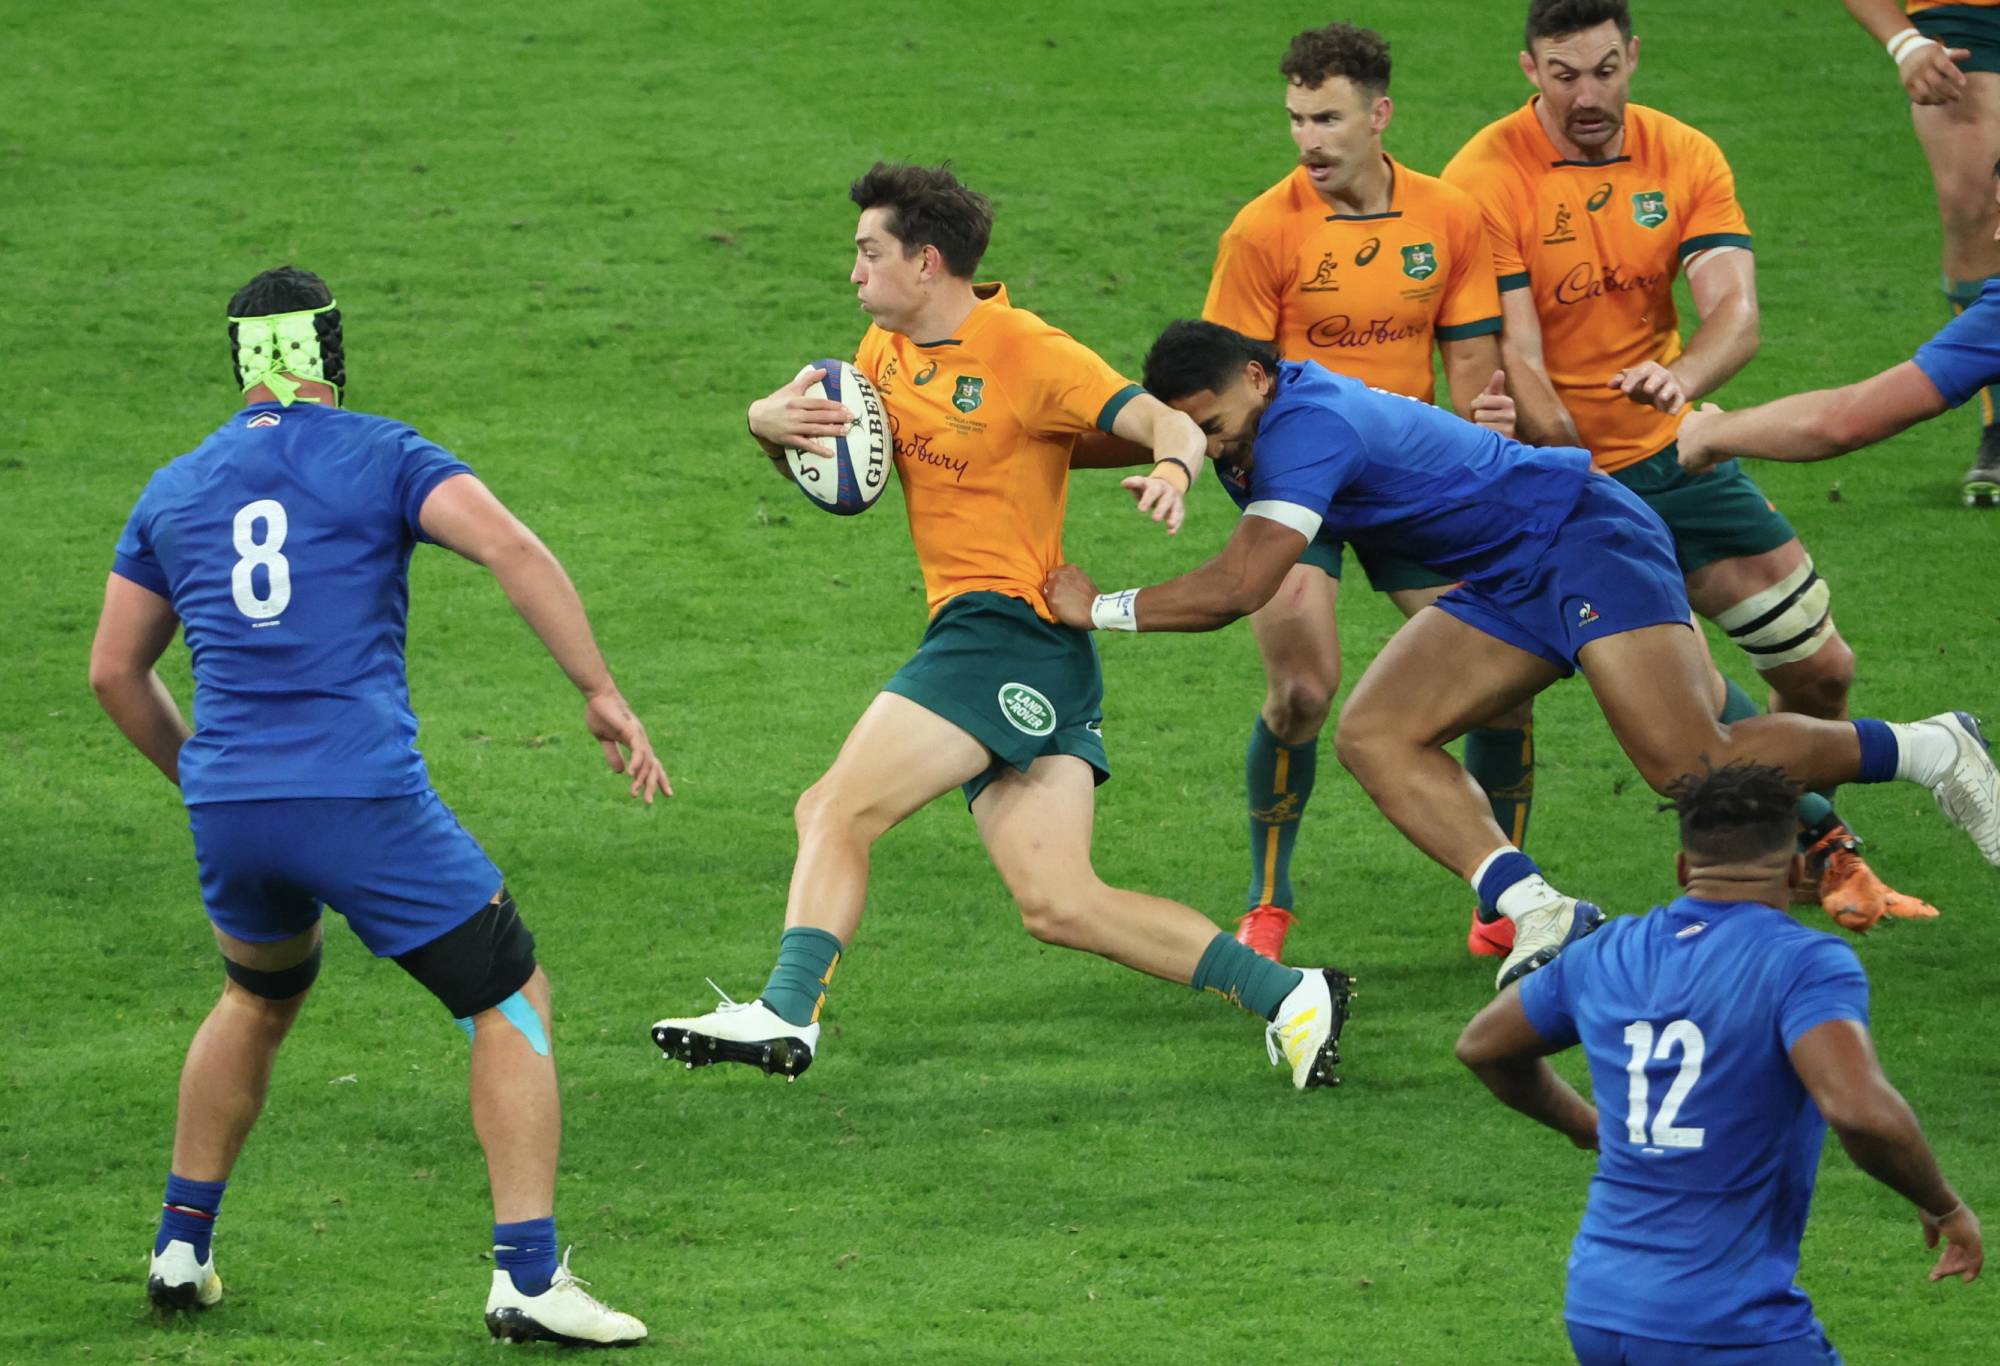 Jock Campbell of Team Australia in action during the Tour d'Autumn match between France and Australia at the Stade de France on November 5, 2022 in Paris, France.  (Photo by Xavier Laine/Getty Images)